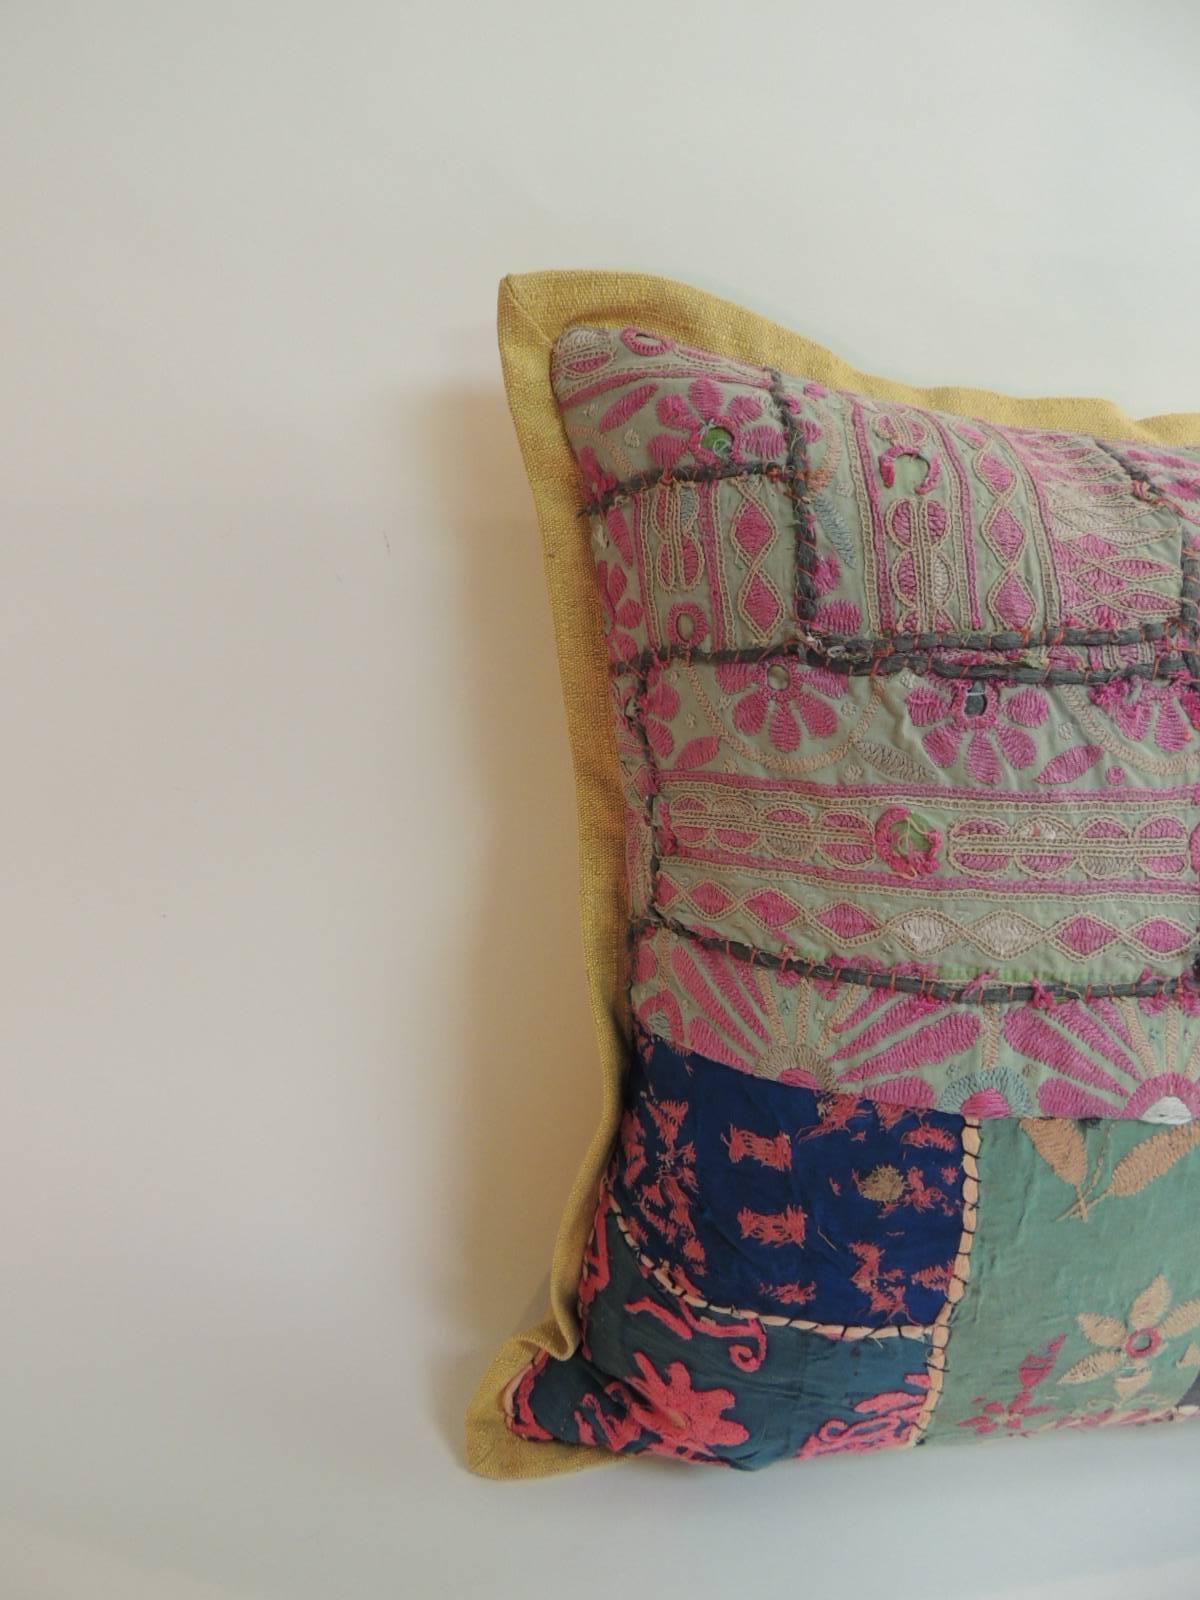 Vintage Indian patchwork colorful decorative floor pillow with textured yellow linen backing and flat trim all around,
In shades of pink, blue, red, yellow, black, purple.
Decorative pillow handcrafted and designed in the USA. Closure by stitch